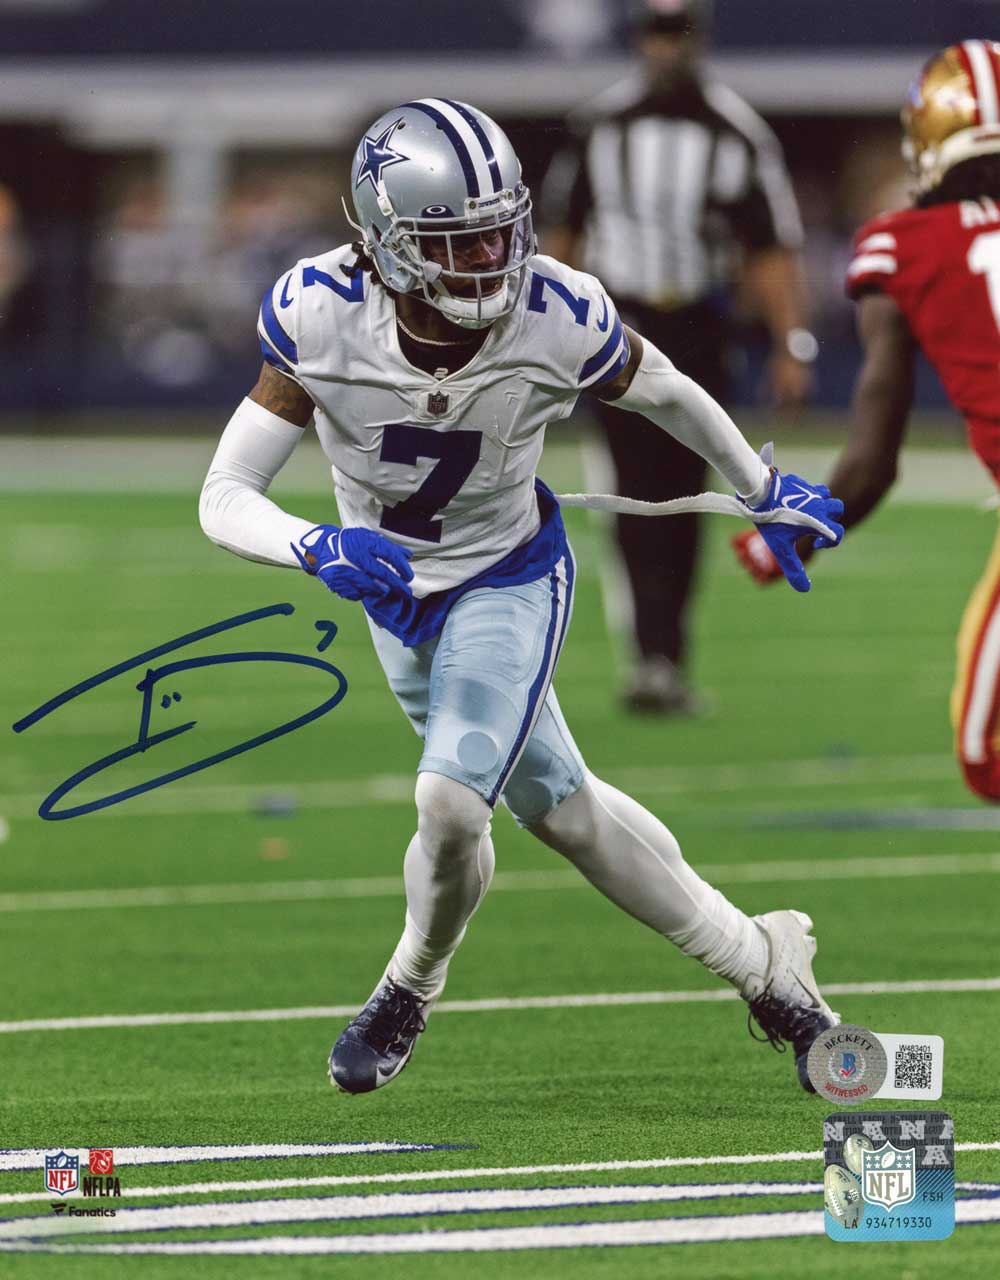 Trevon Diggs Autographed/Signed Dallas Cowboys 8x10 photo Beckett